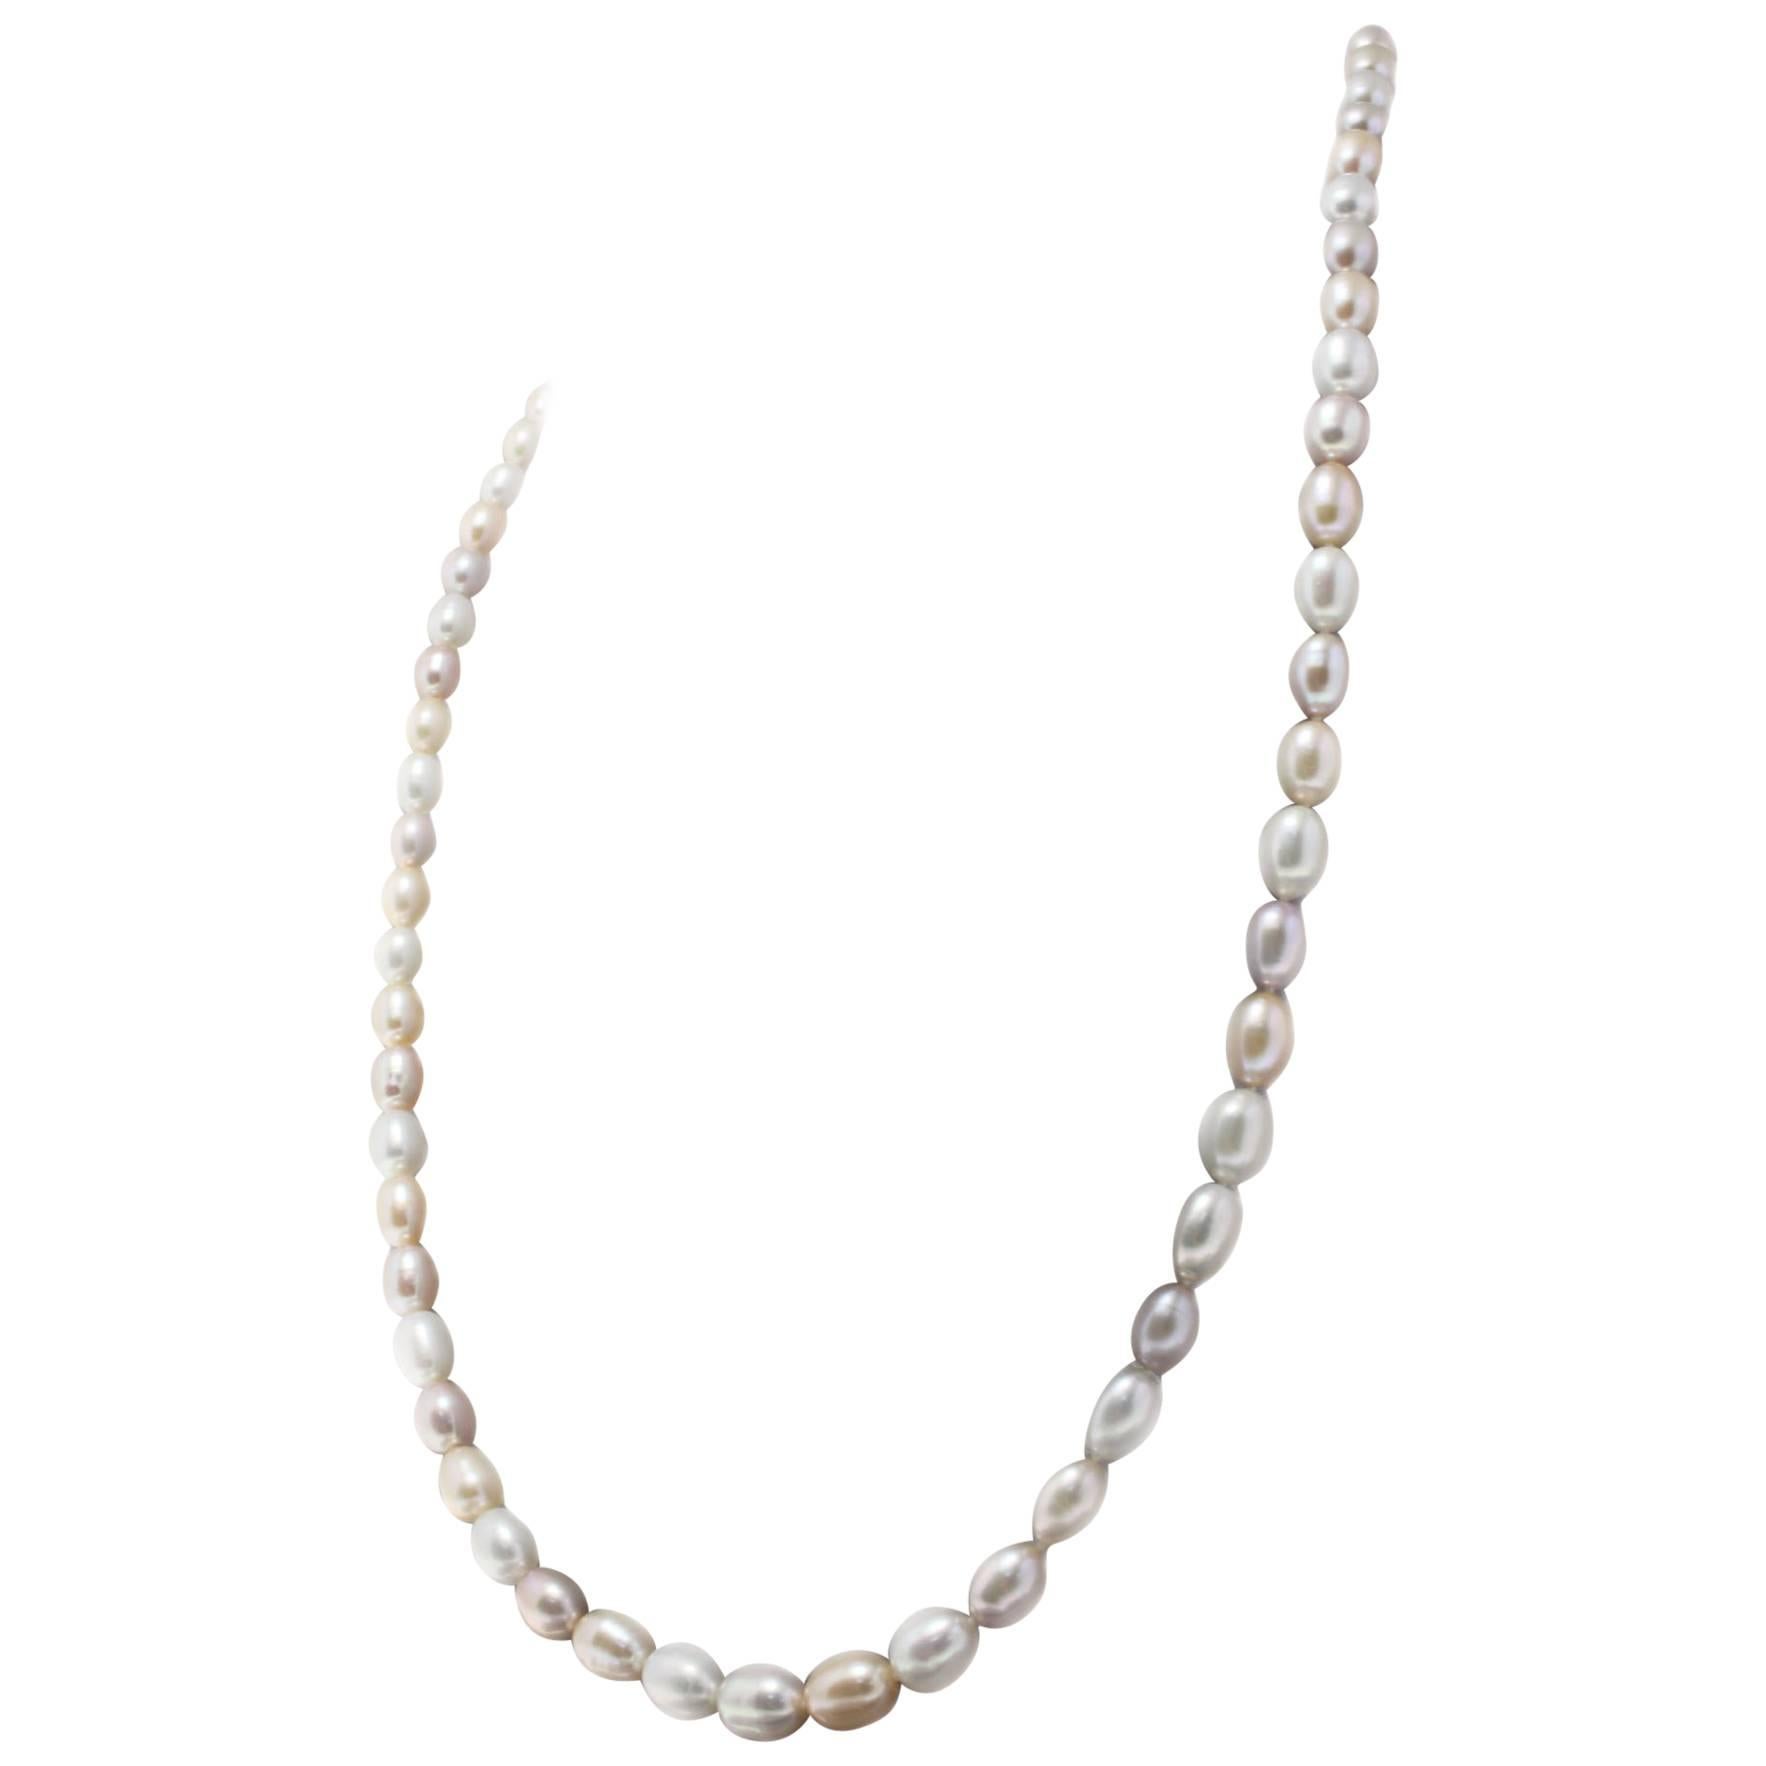  88.70 g Pearls Beaded/ Multi-Strand Necklace